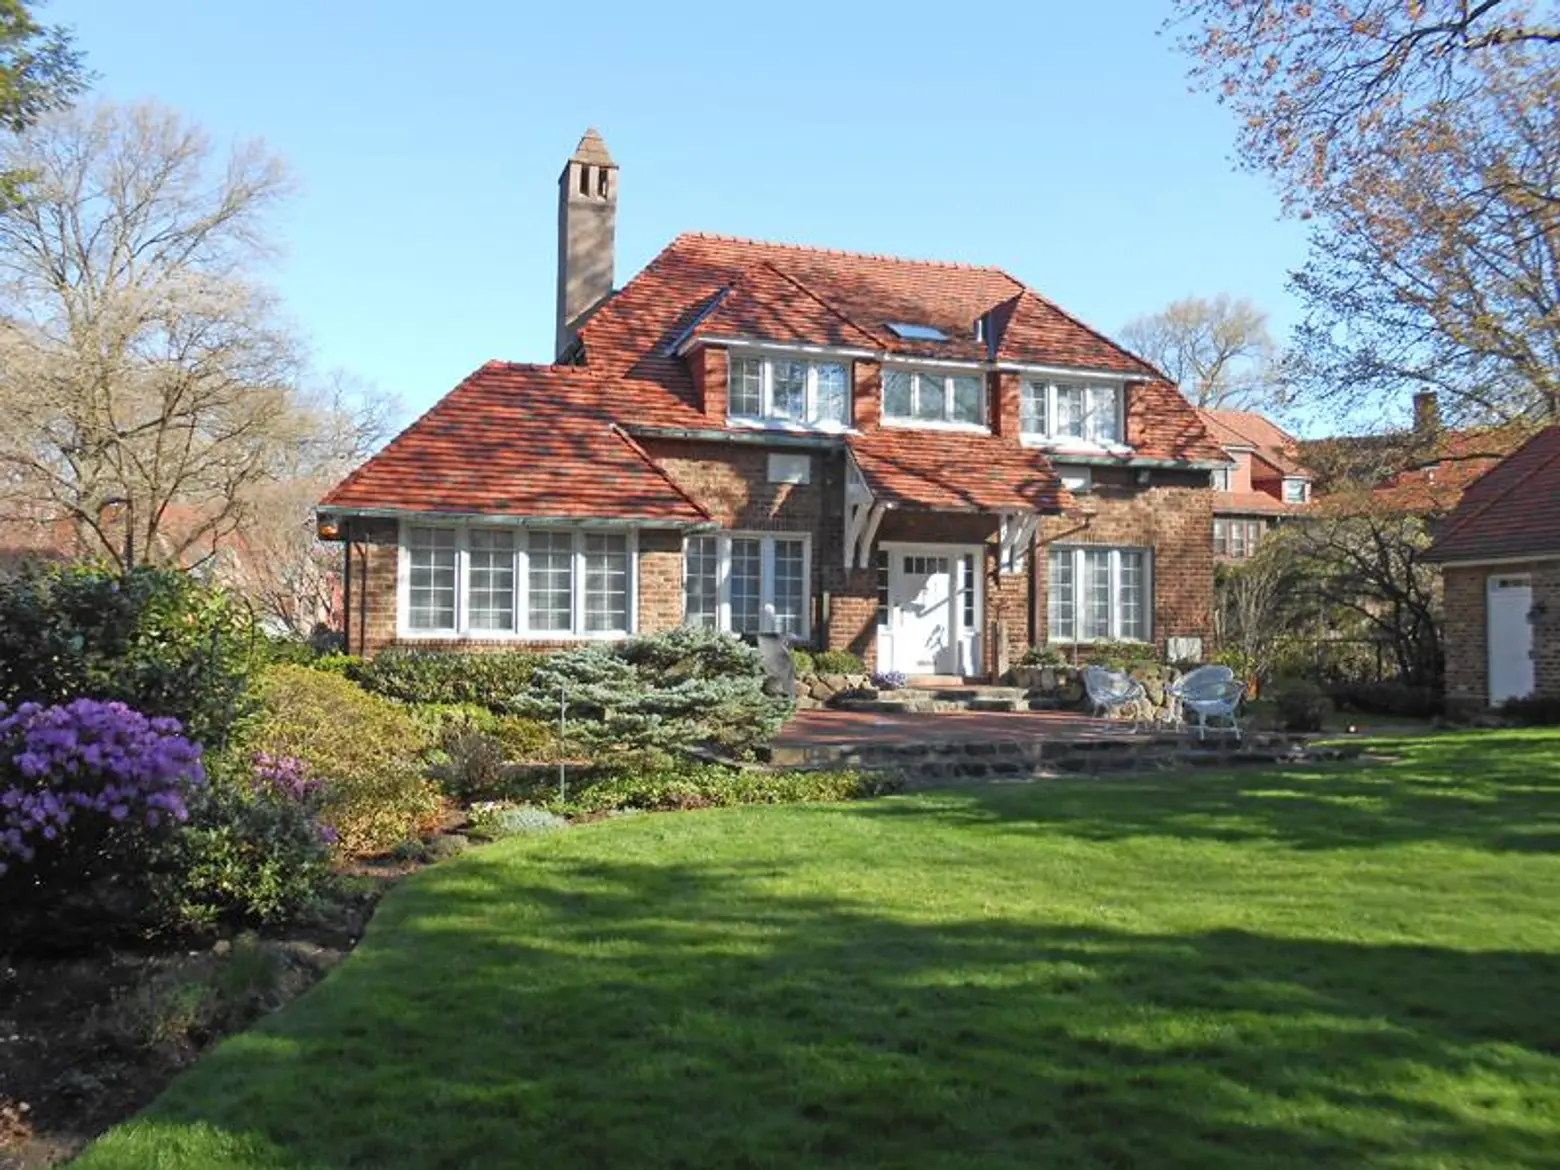 Forest Hills Gardens, Tudor, Queens, Planned Community, Olmsted, Atterbury, garden city